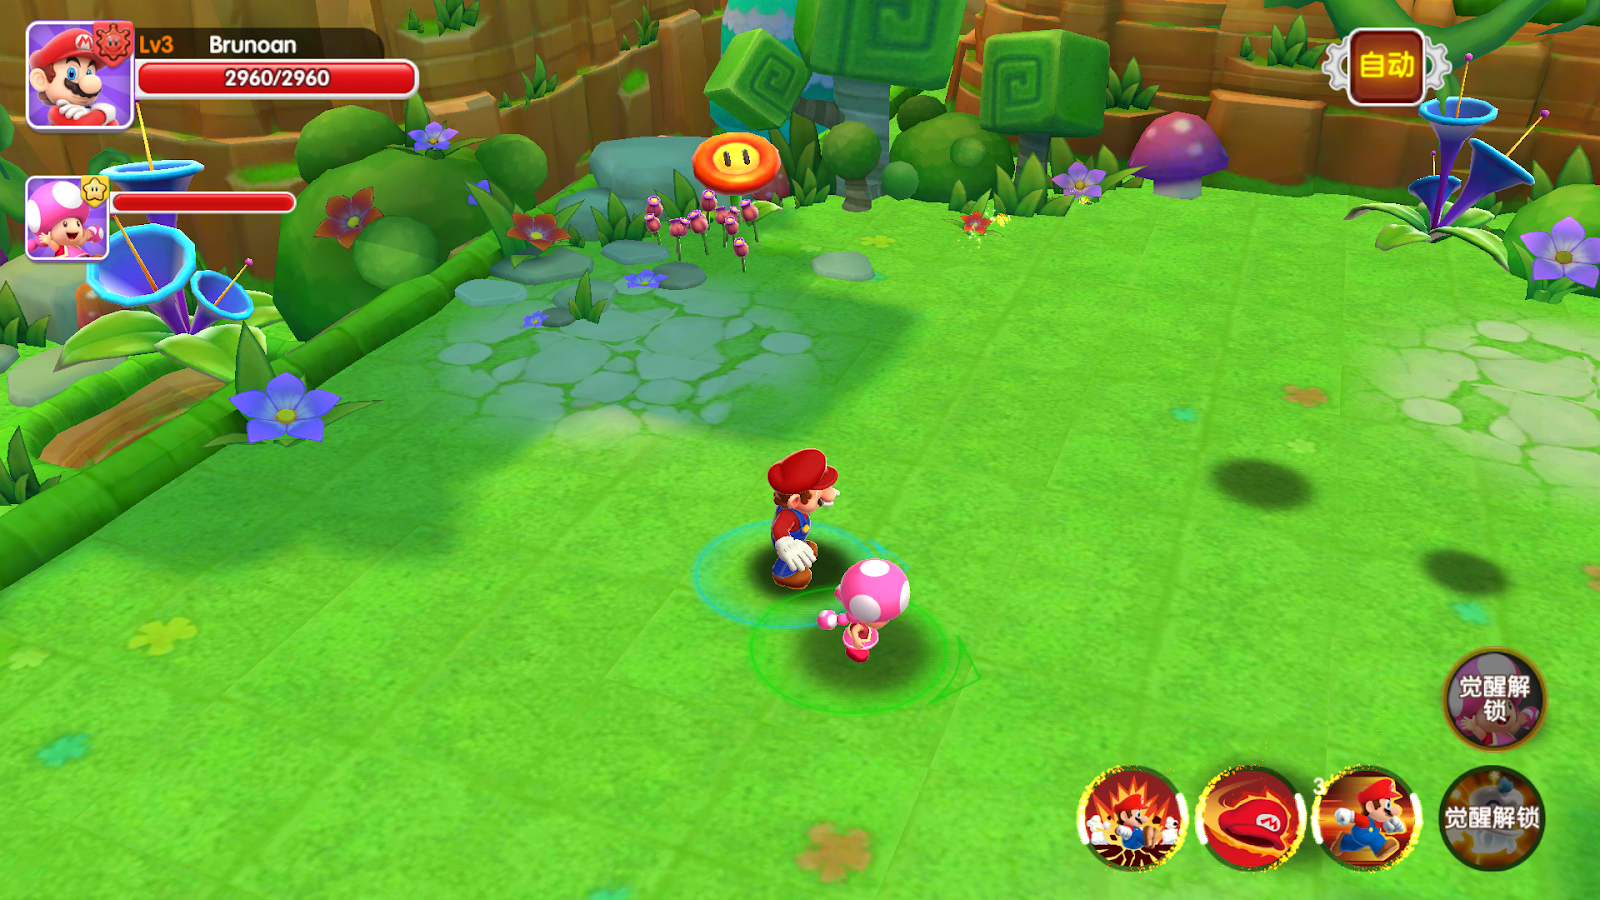 super mario 3d world apk download for android